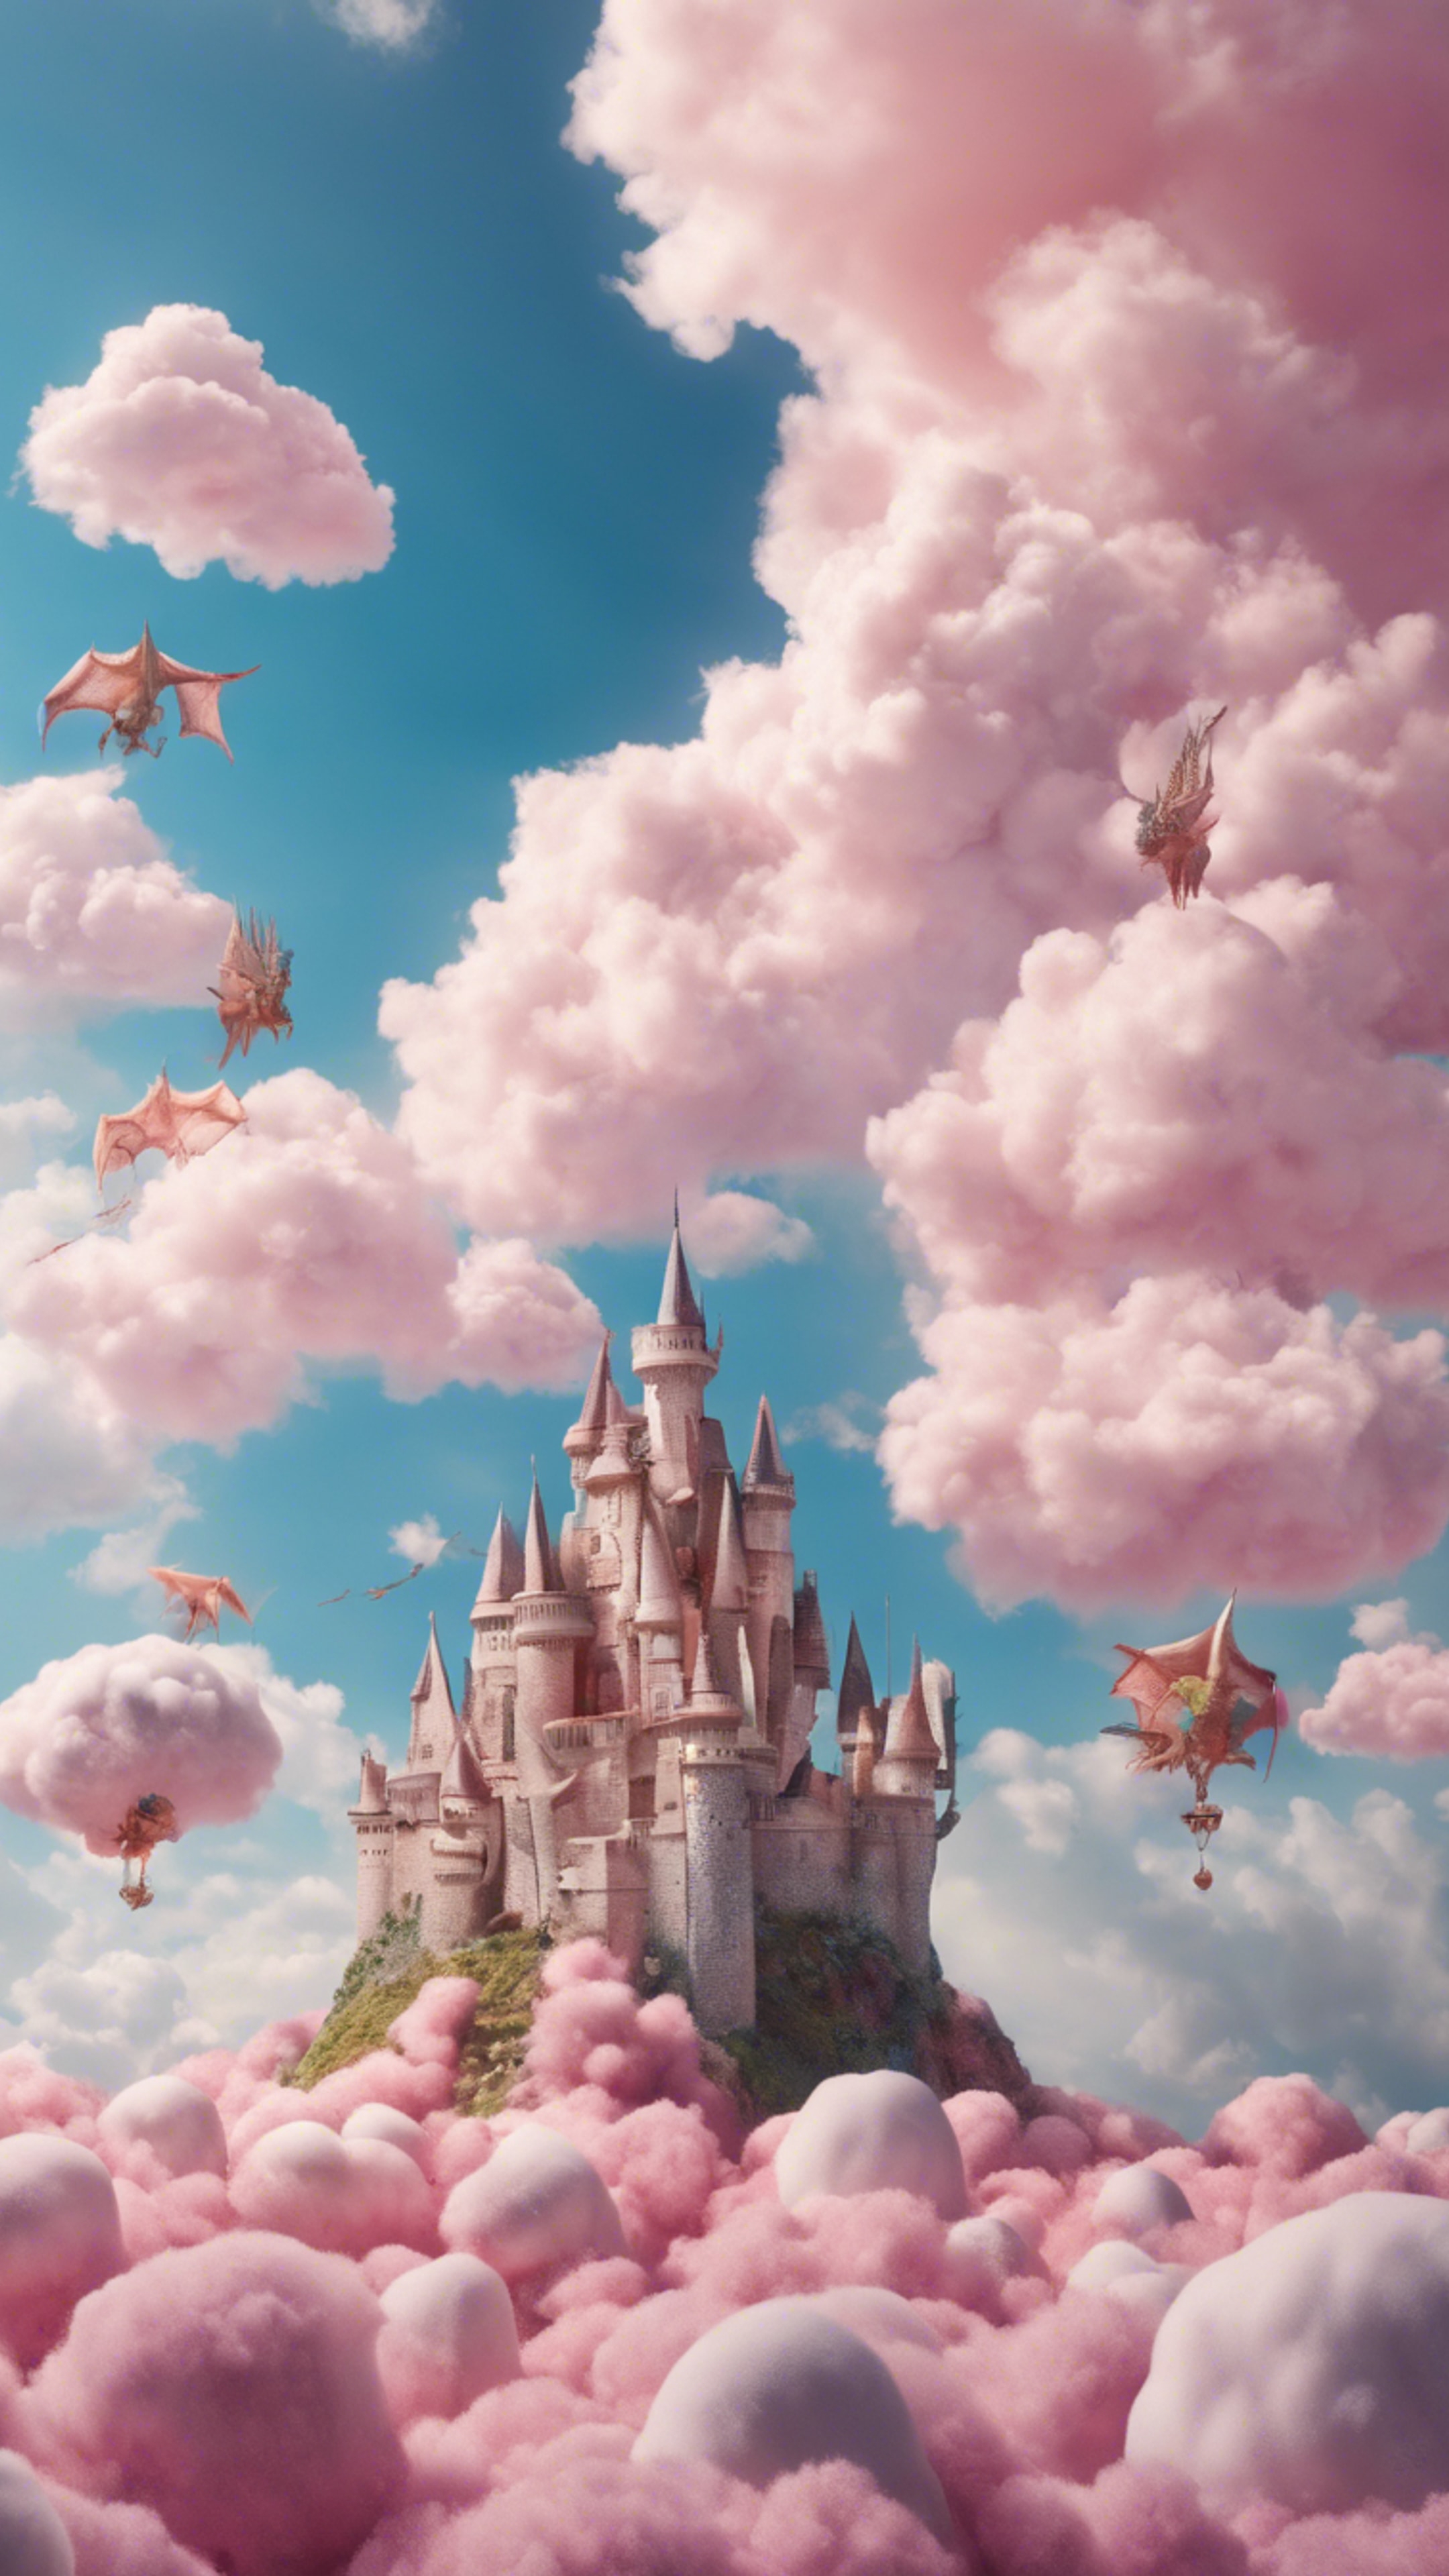 A castle floating in the sky above fluffy, cotton-candy-like clouds surrounded by a huddle of playful, magical dragons. Wallpaper[be63bba74c3941c98c10]